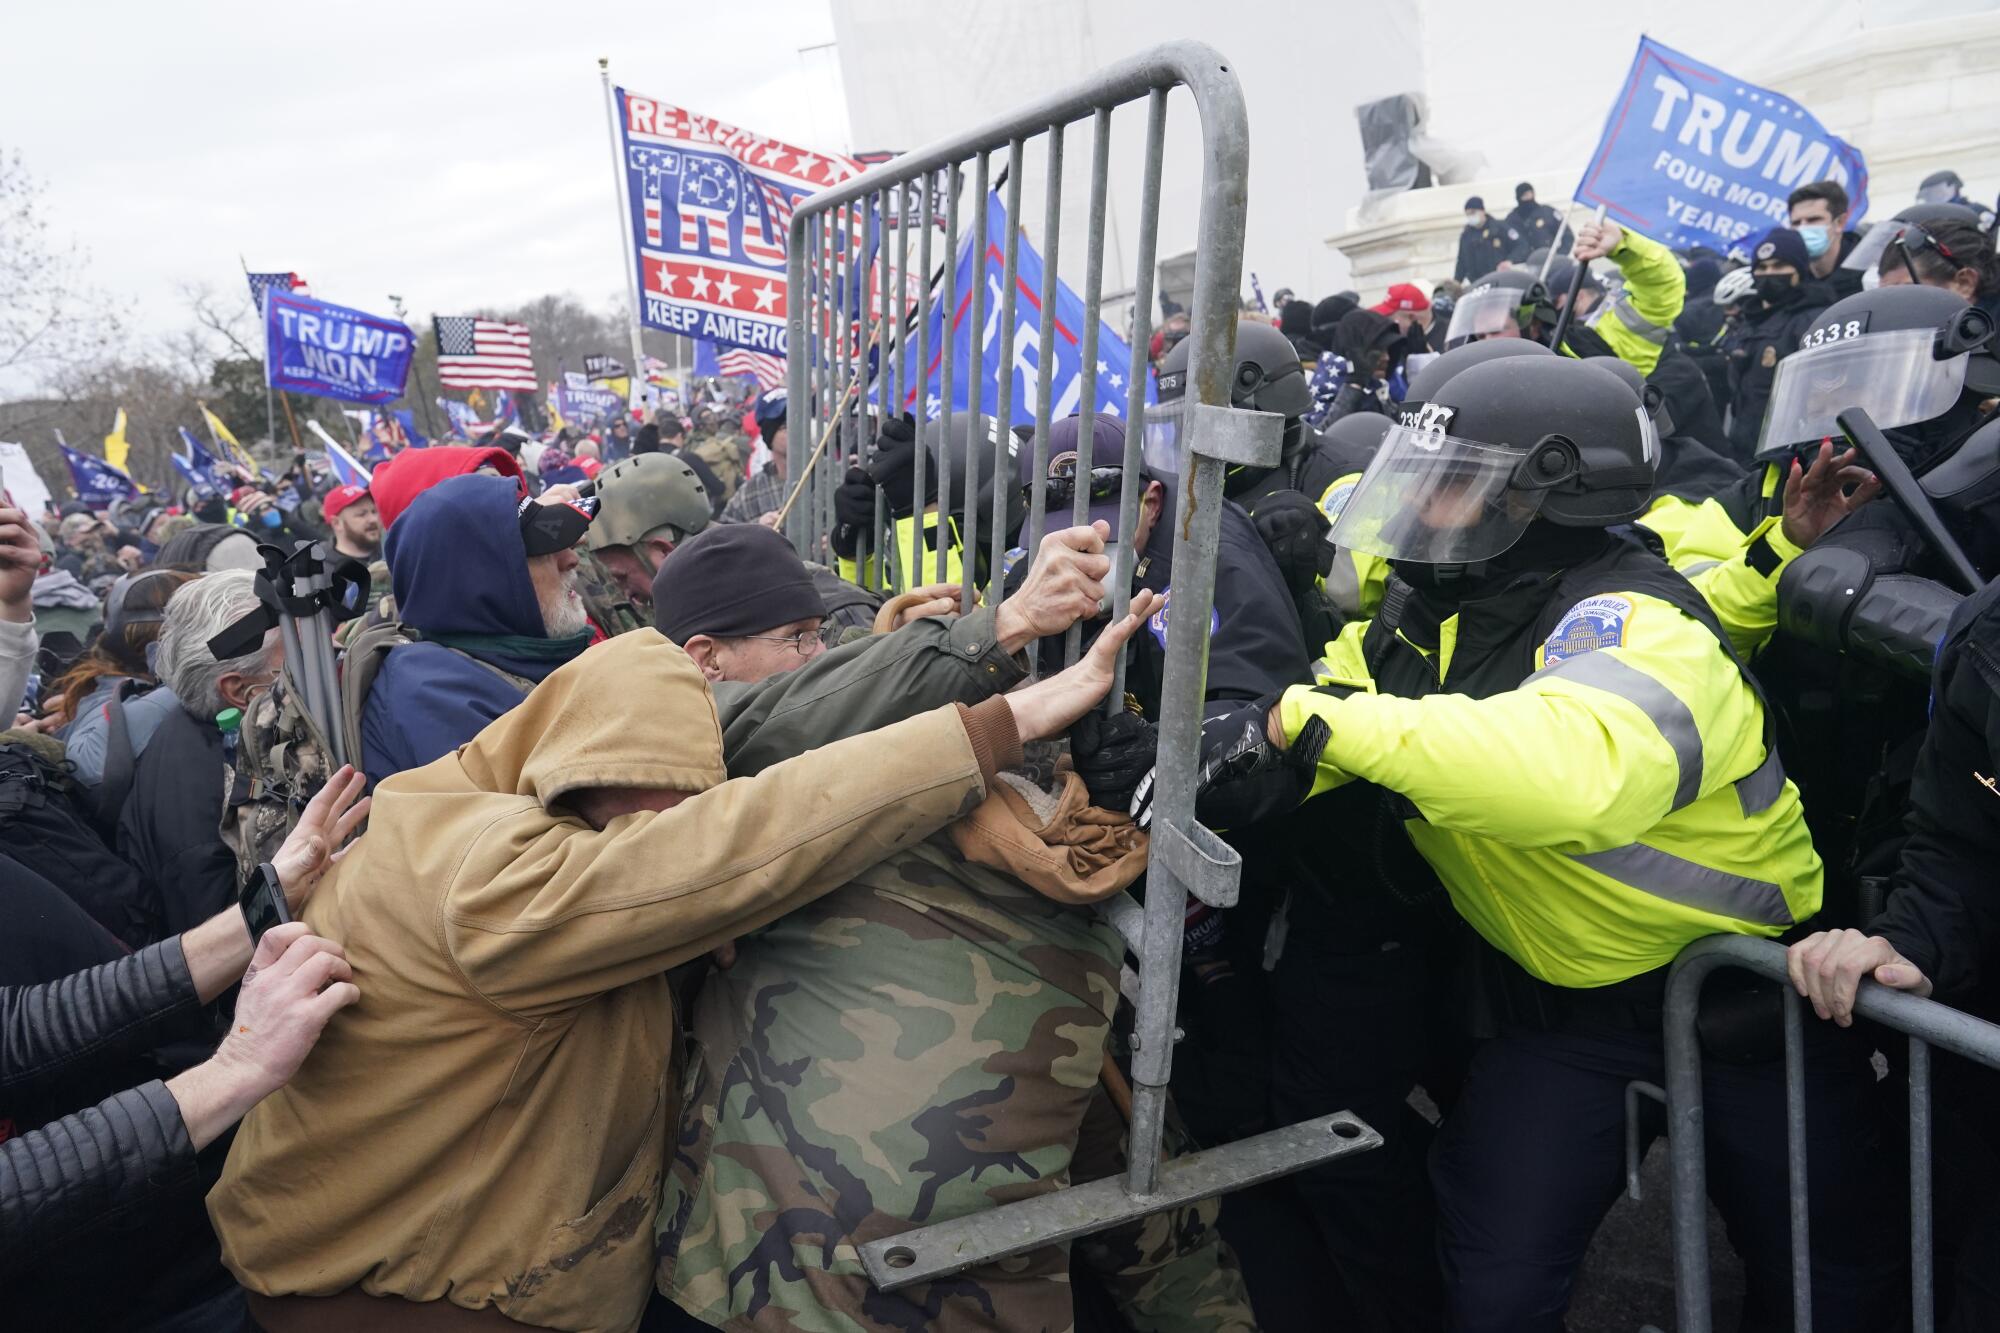 A crowd of rioters with Trump flags presses into a police metal barricade, with officers pushing back.